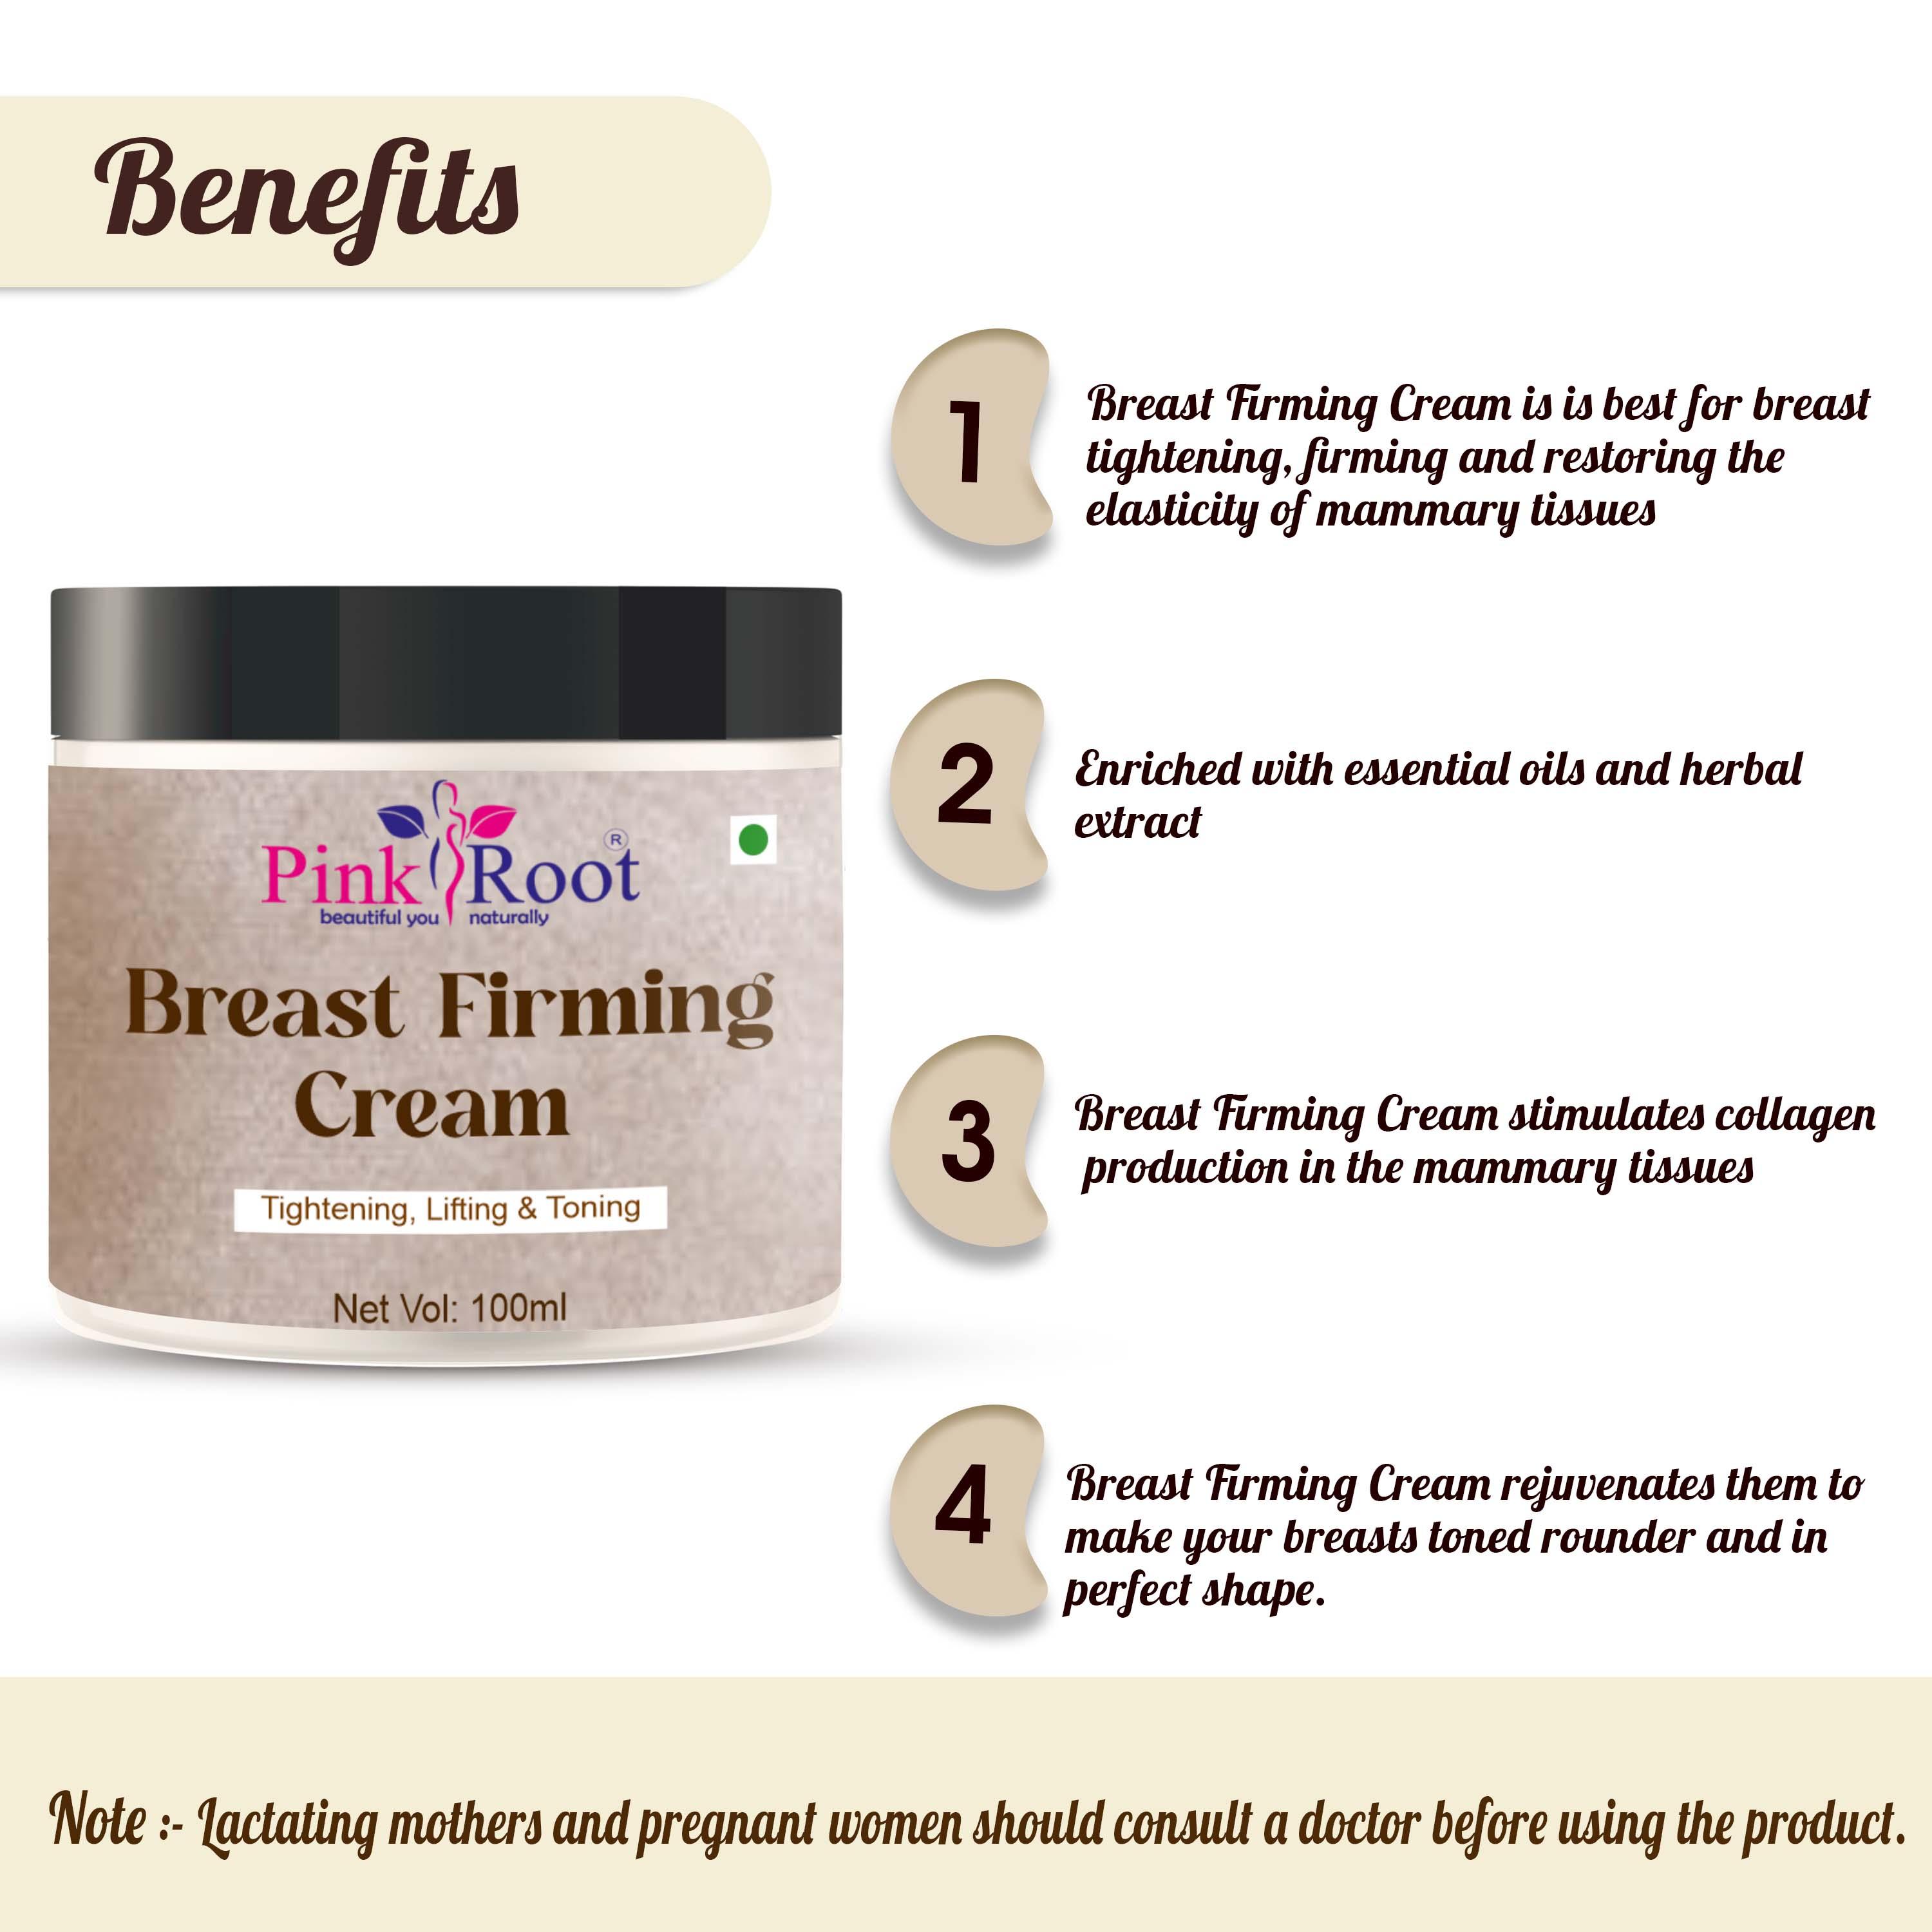 Pink Root Breast Firming Cream 100ml, Caused by Wired Bra, 100% natural which helps in growth and firming and increase for big size breast 36 - Pink Root